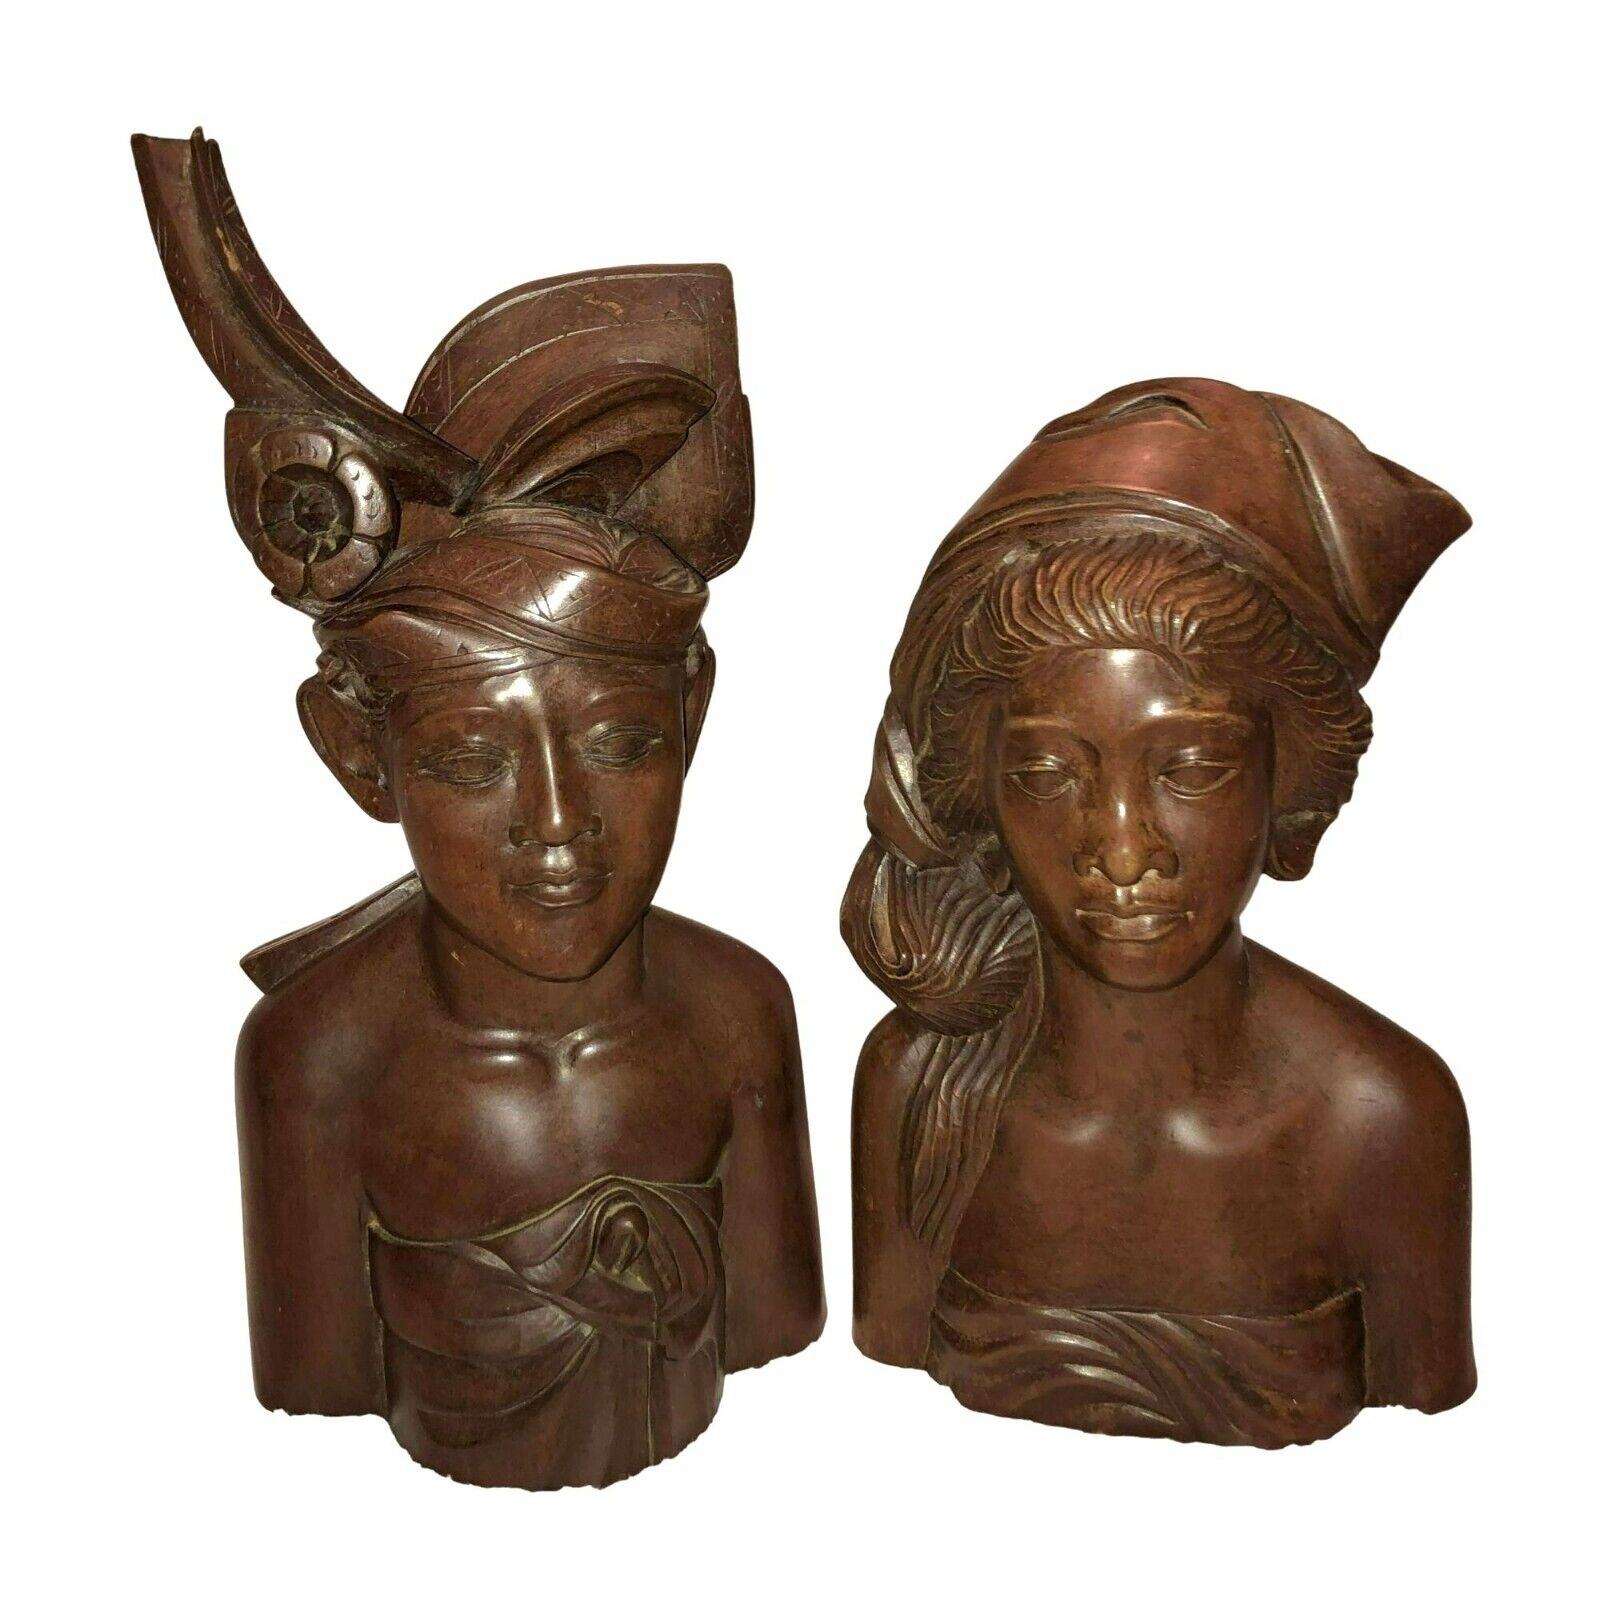 HAND CARVED INDONESIAN BUSTS SIGNED A A FATIMAH WOMAN WARRIOR 40s BALI SET OF 2